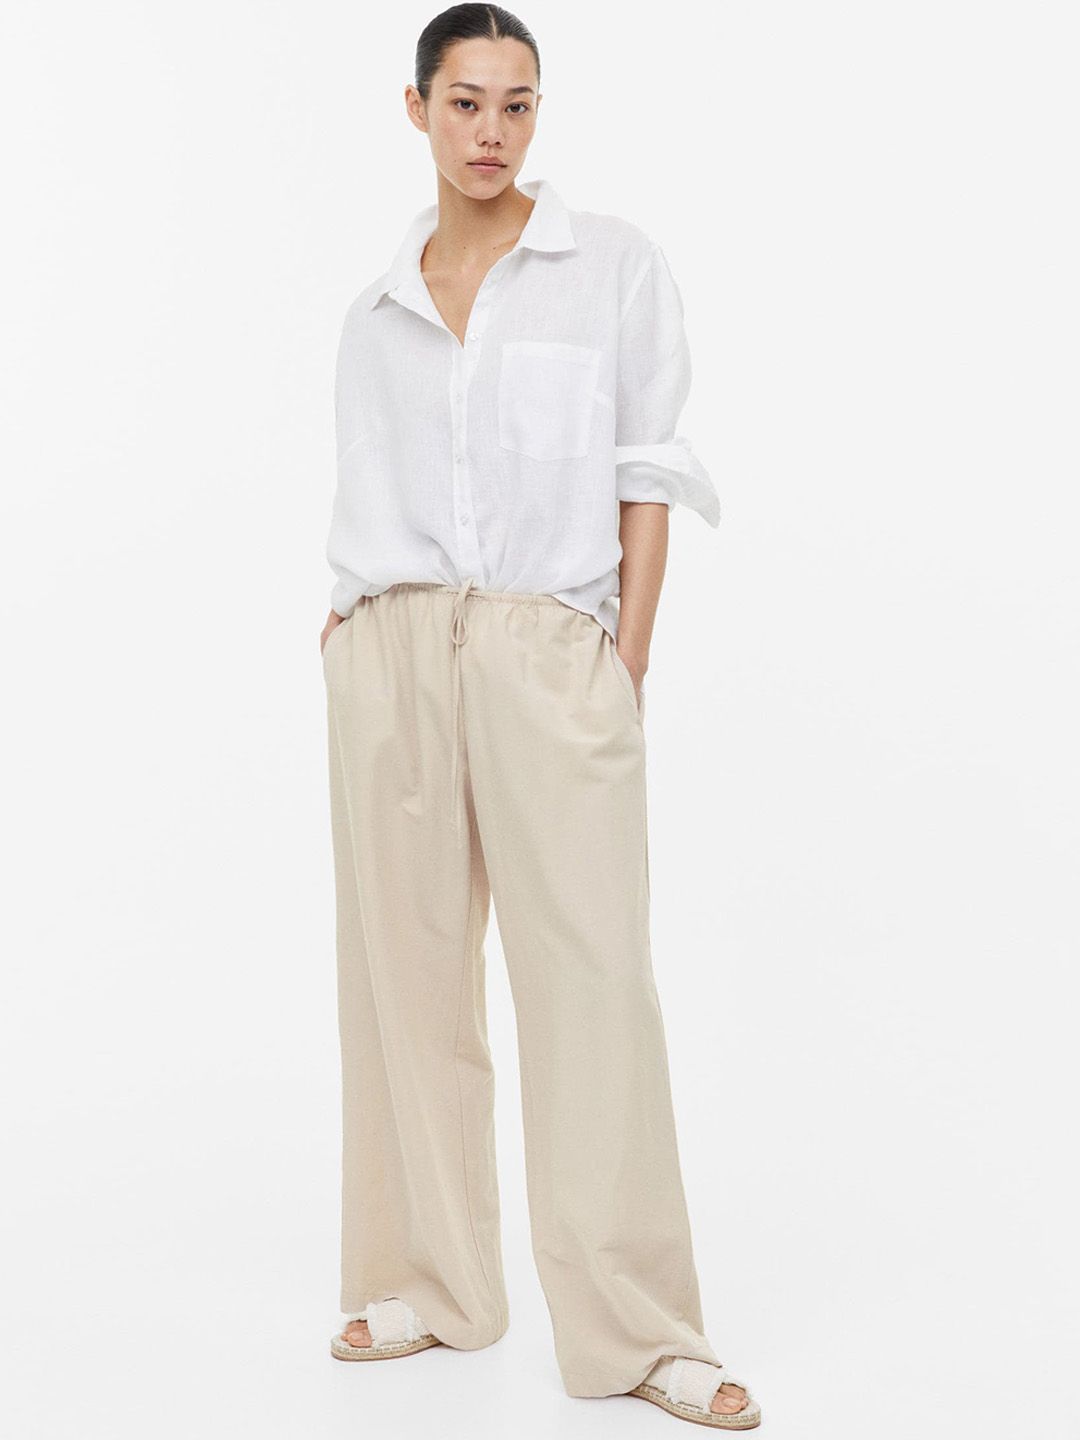 H&M Women Linen-Blend Trousers Price in India